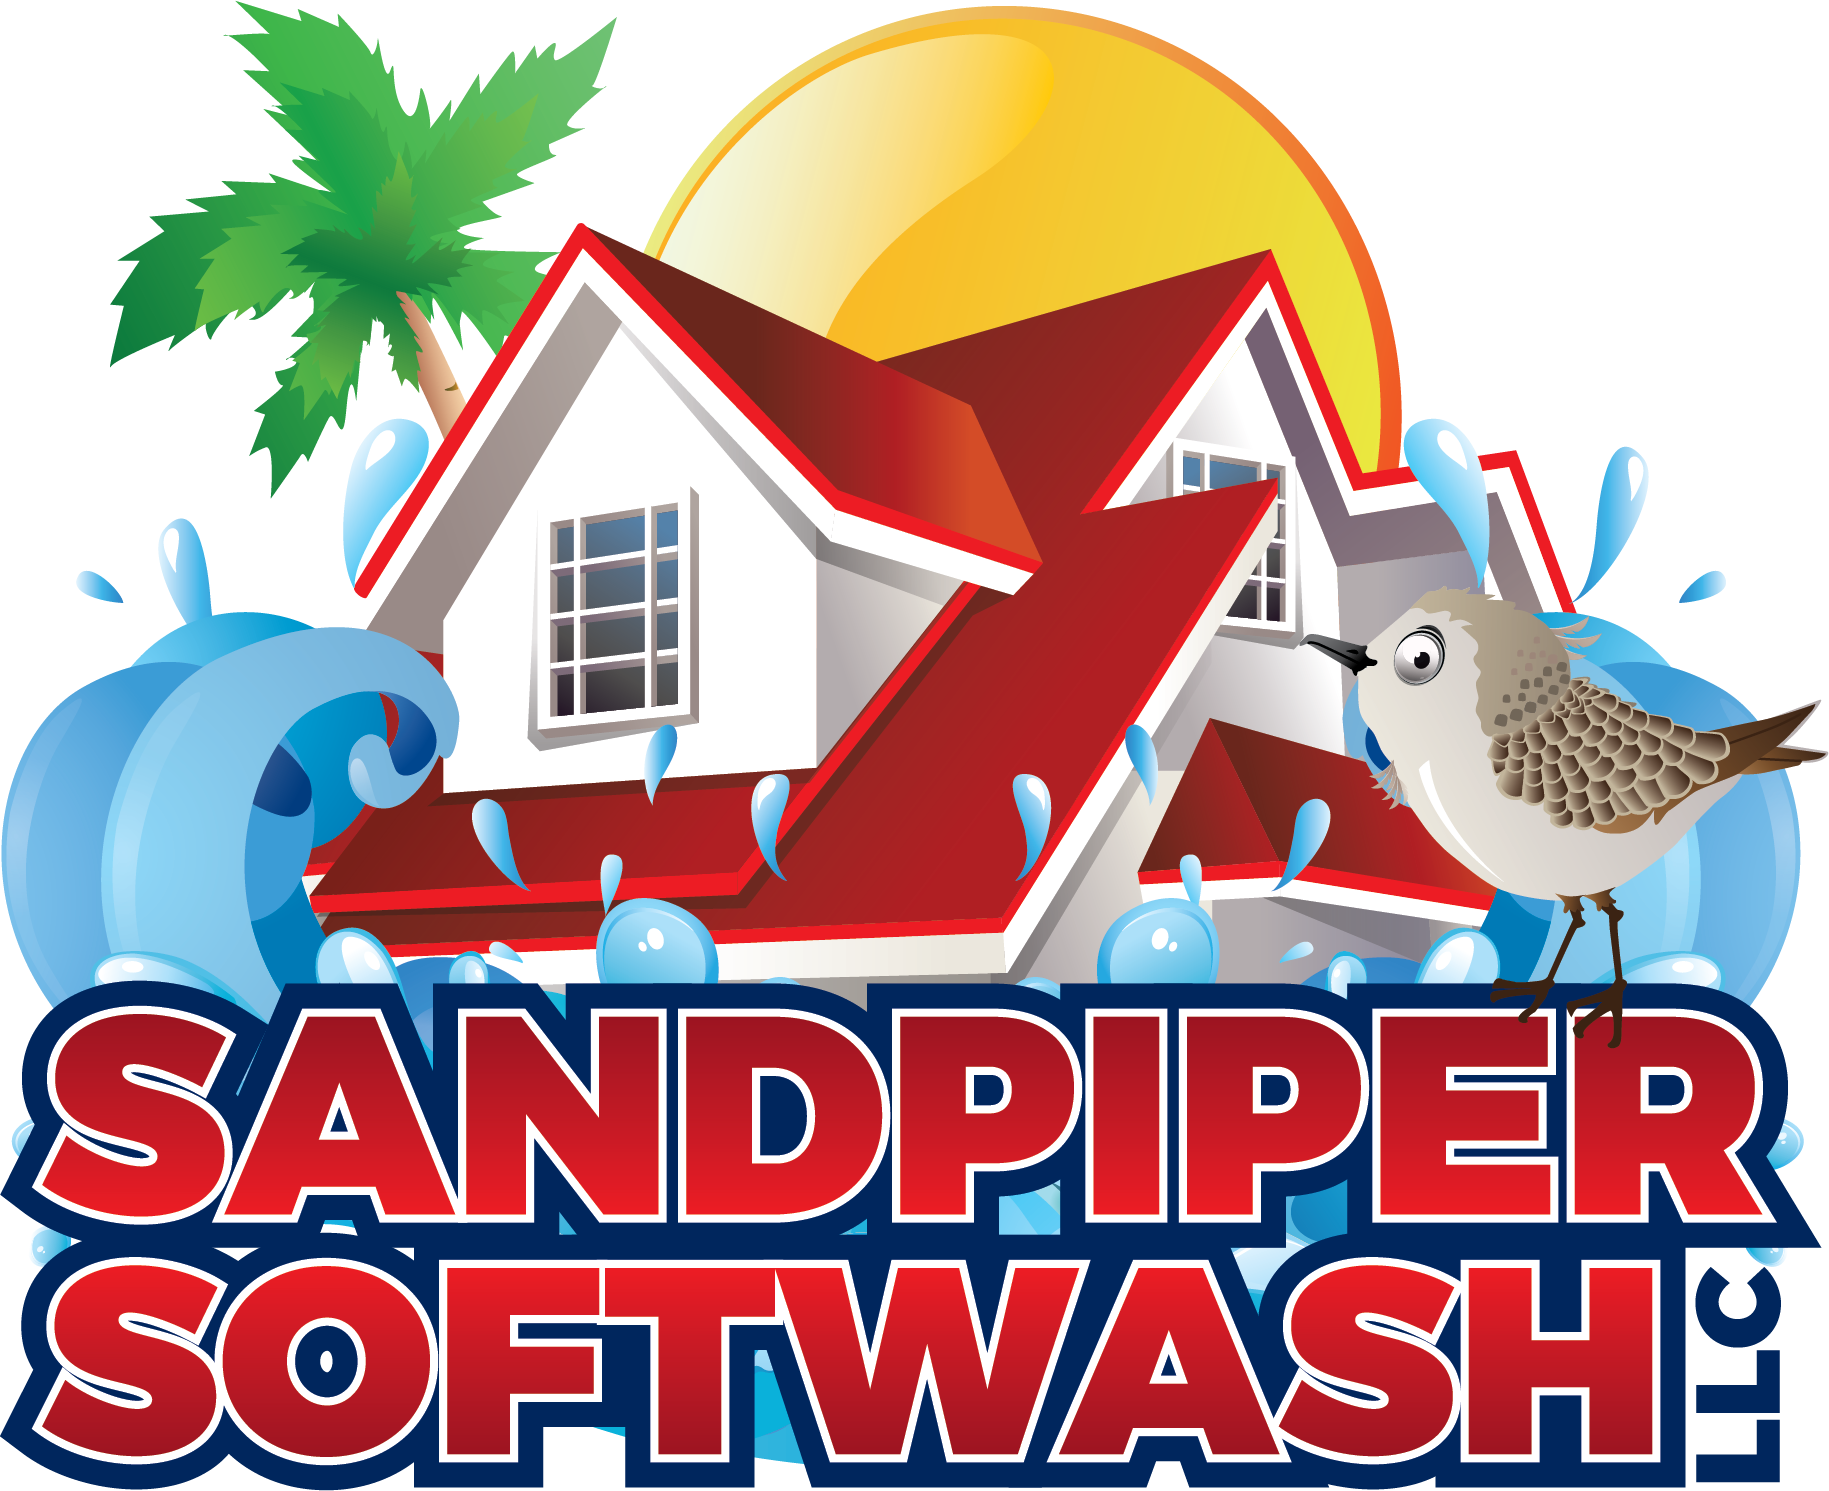 a logo for sandpiper softwash shows a house and a bird